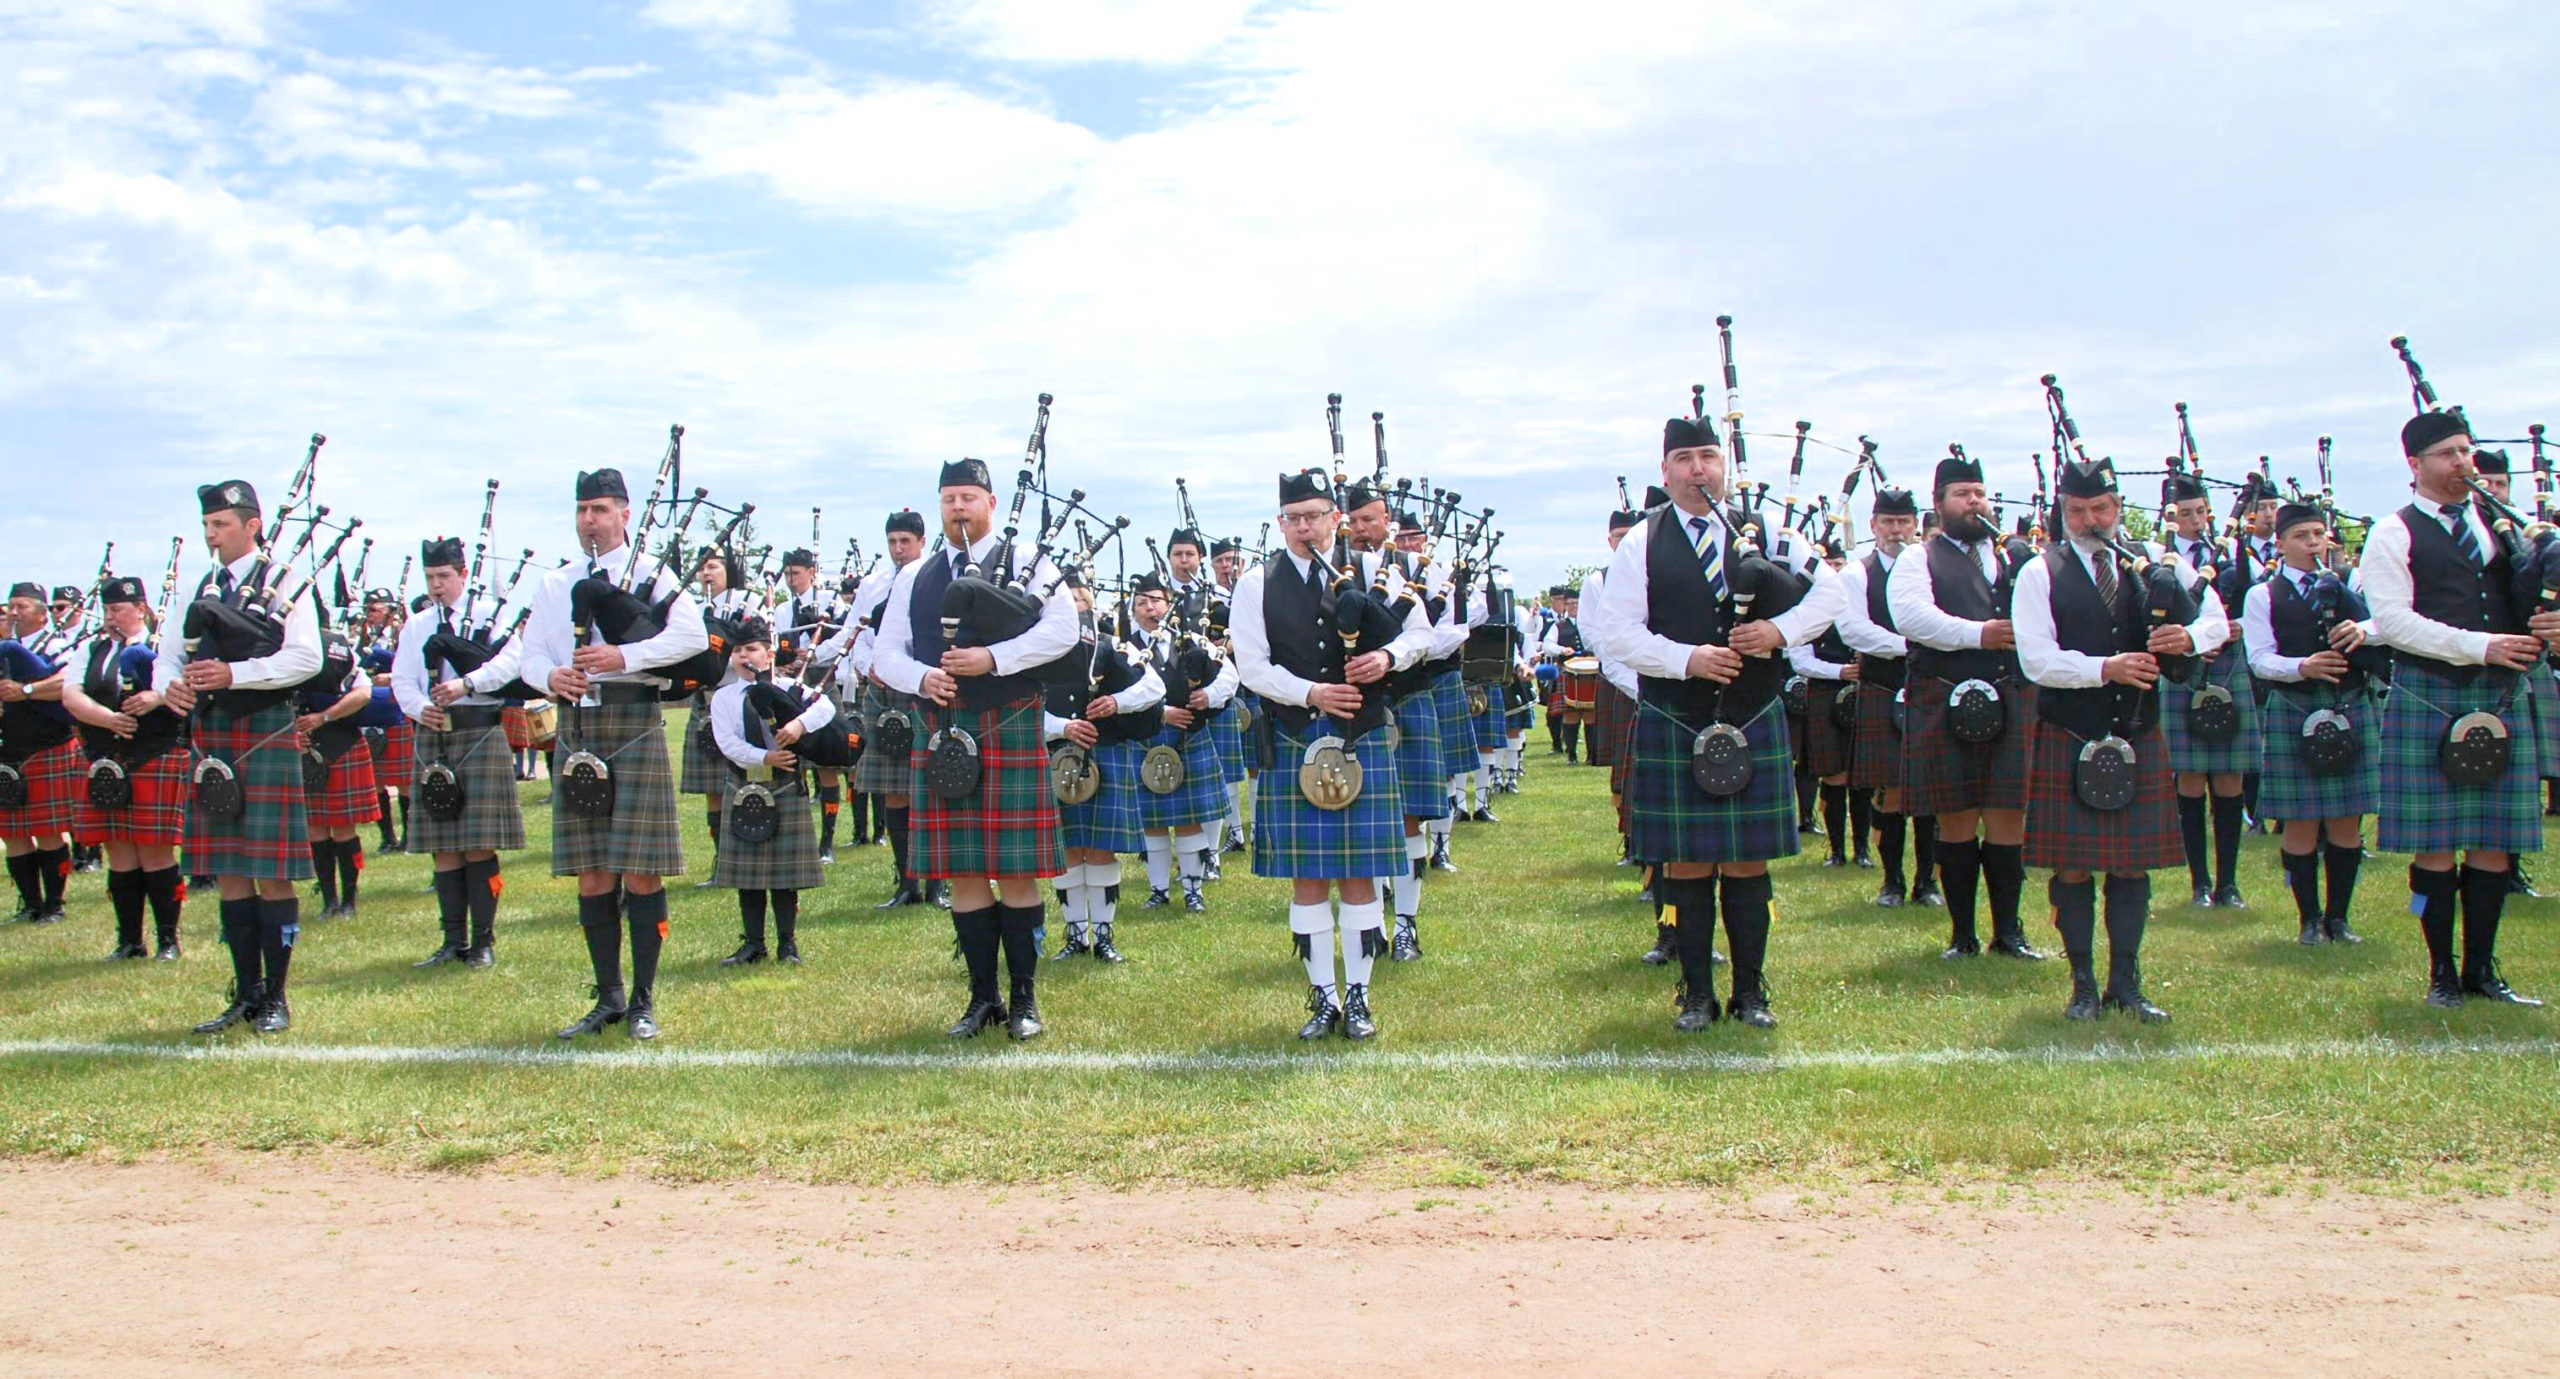 moncton-highland-games-massed-bands-photo-by-jenna-morton | The ...